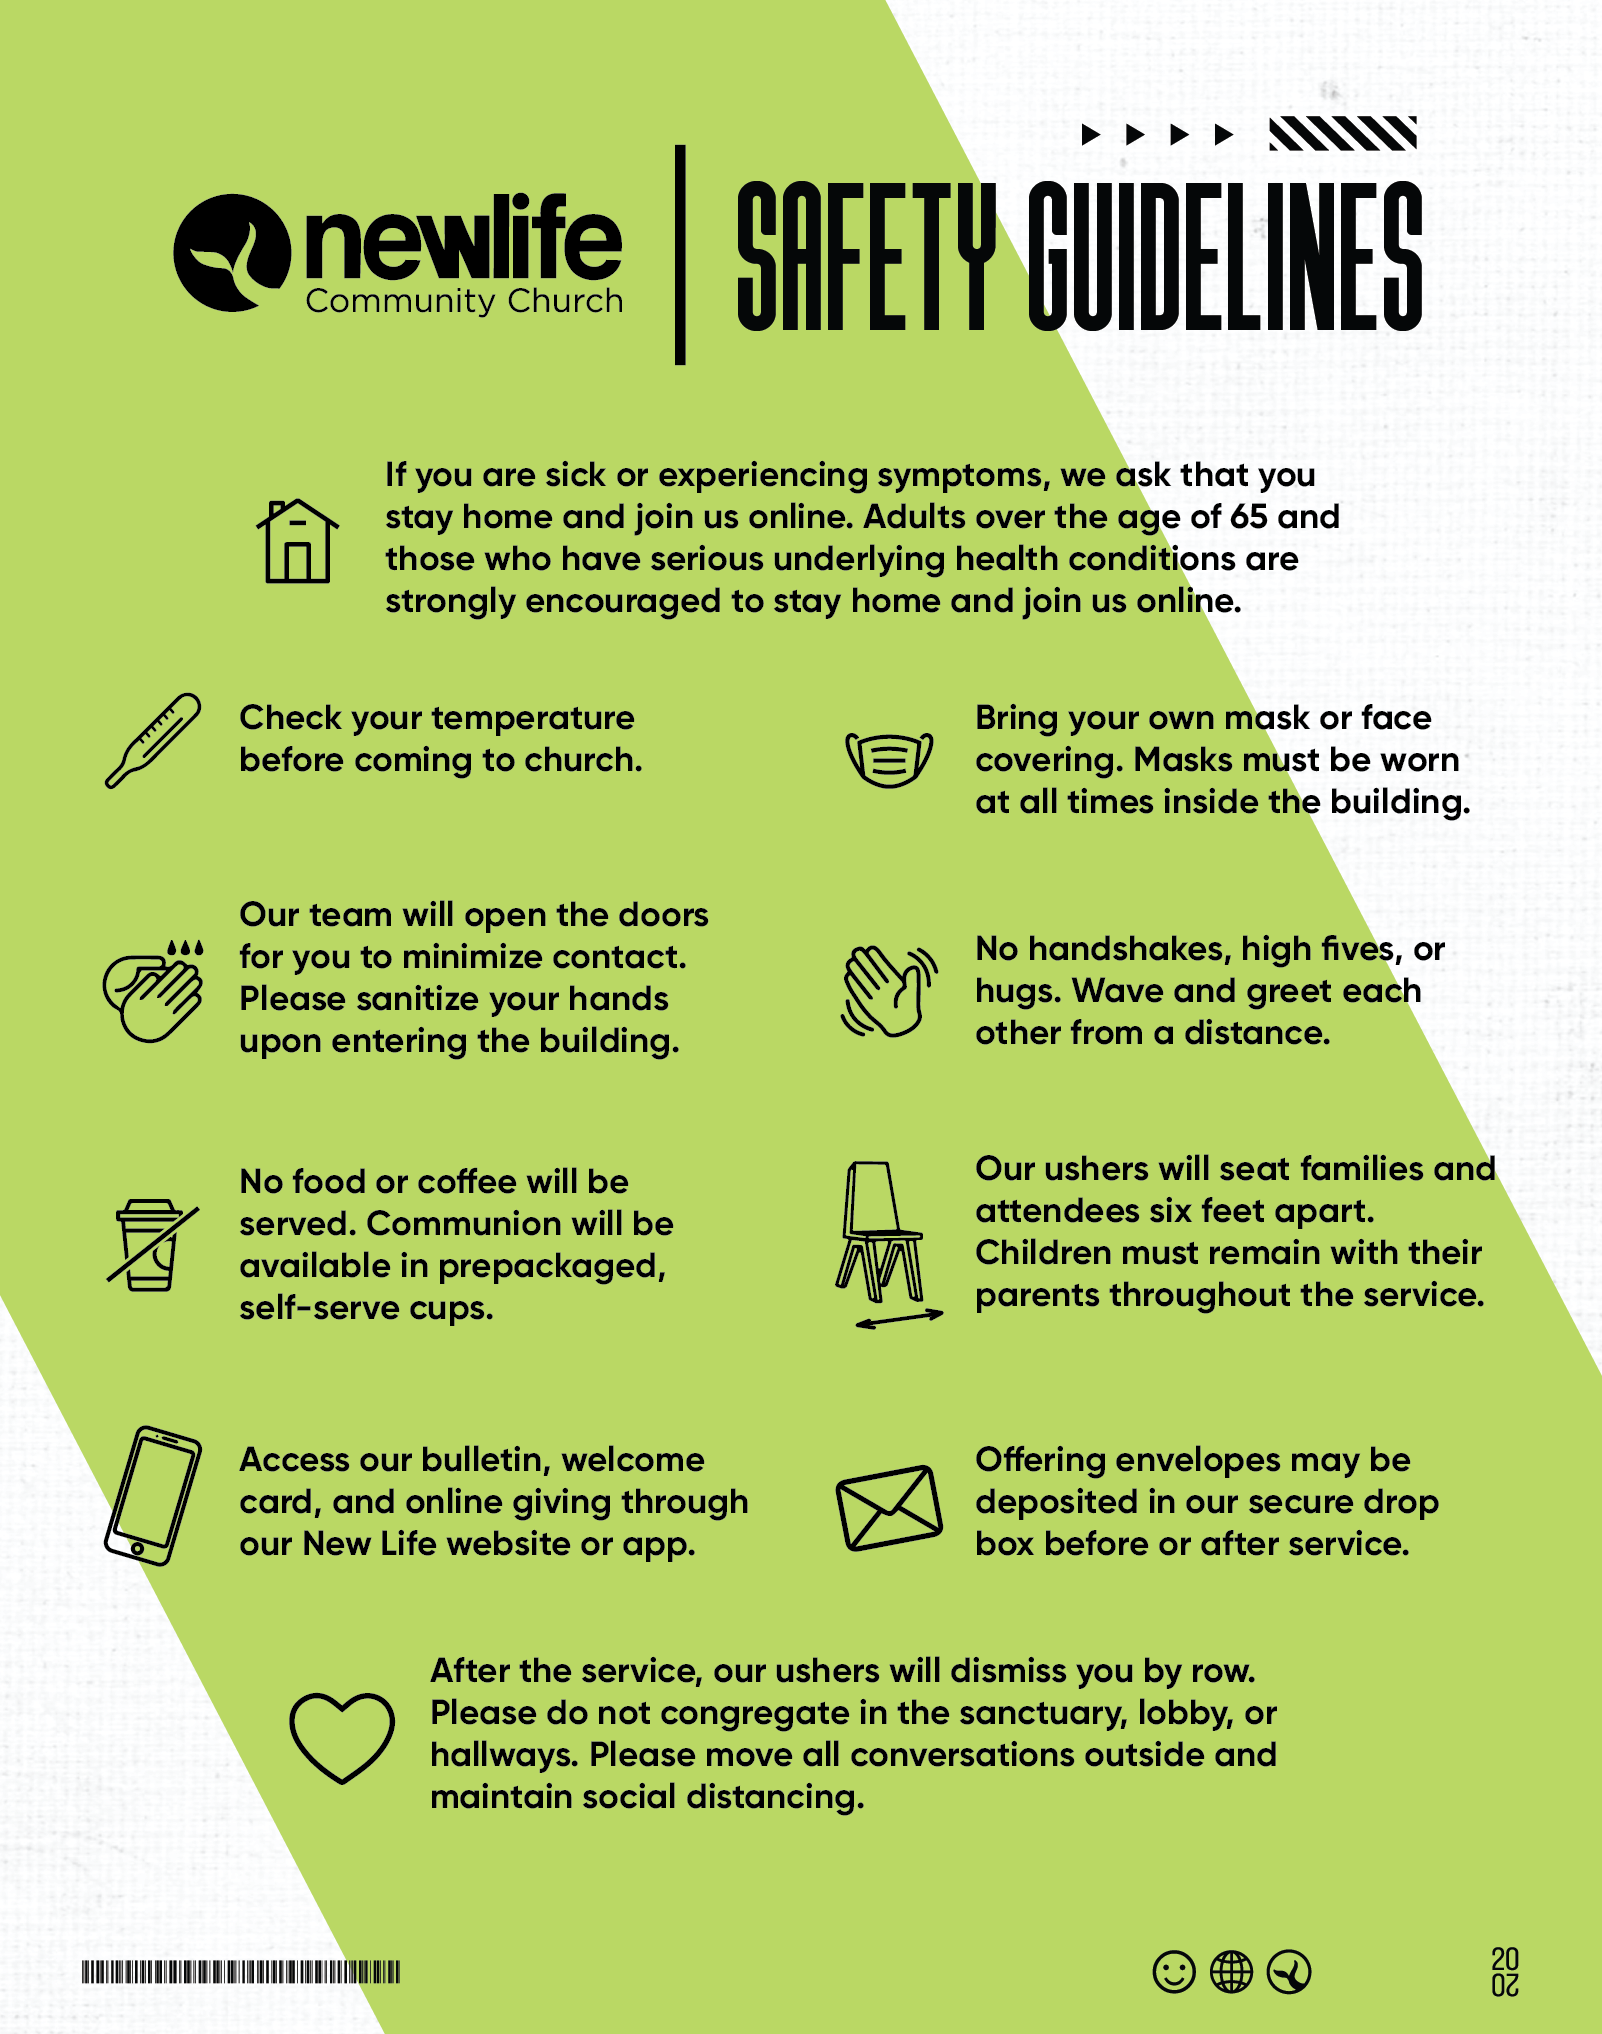 Guidelines-22x28_English